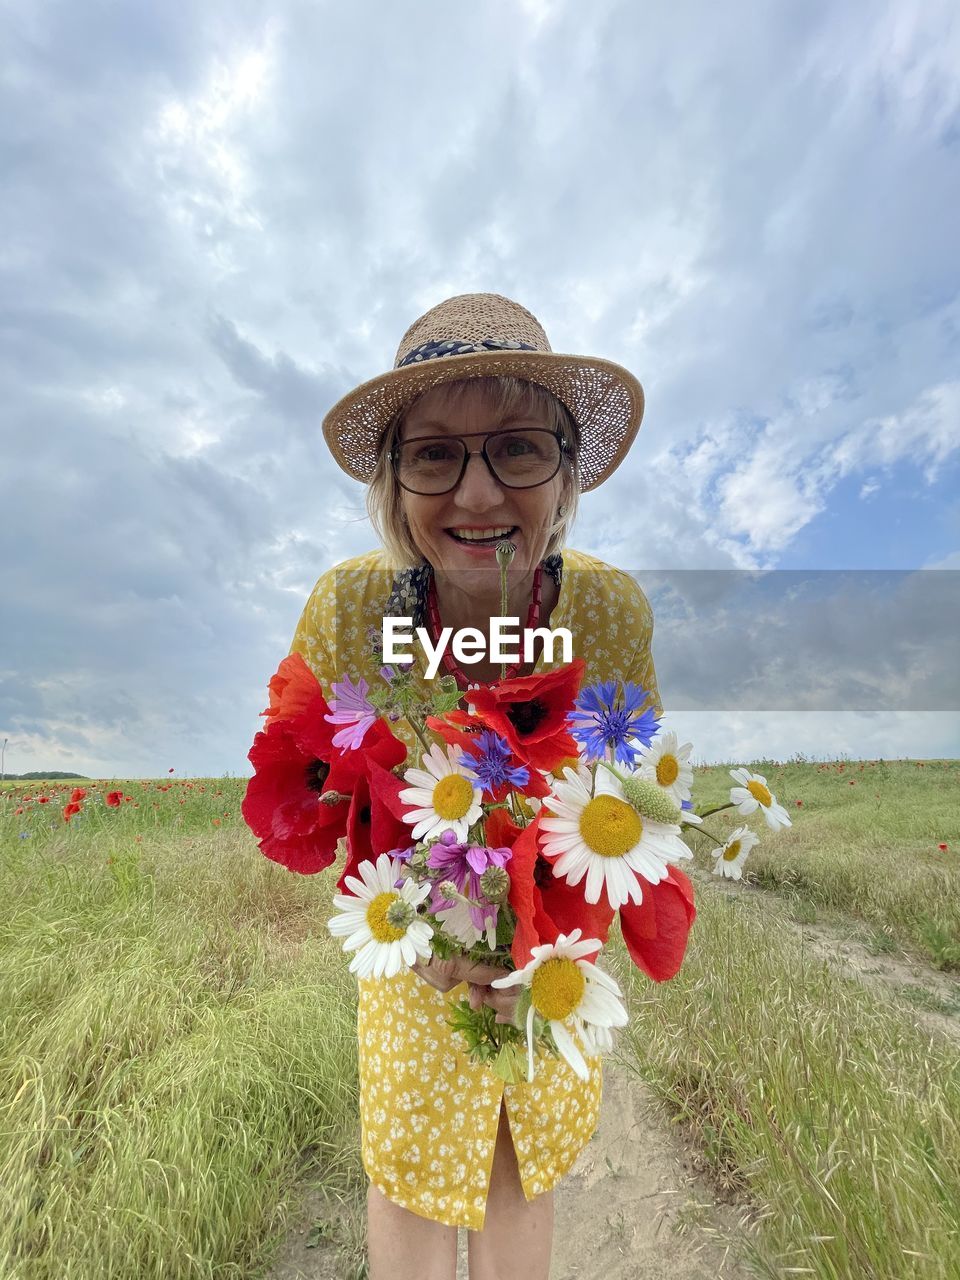 Portrait of a radiant woman with a summer hat and a colorful bouquet of flowers in a meadow